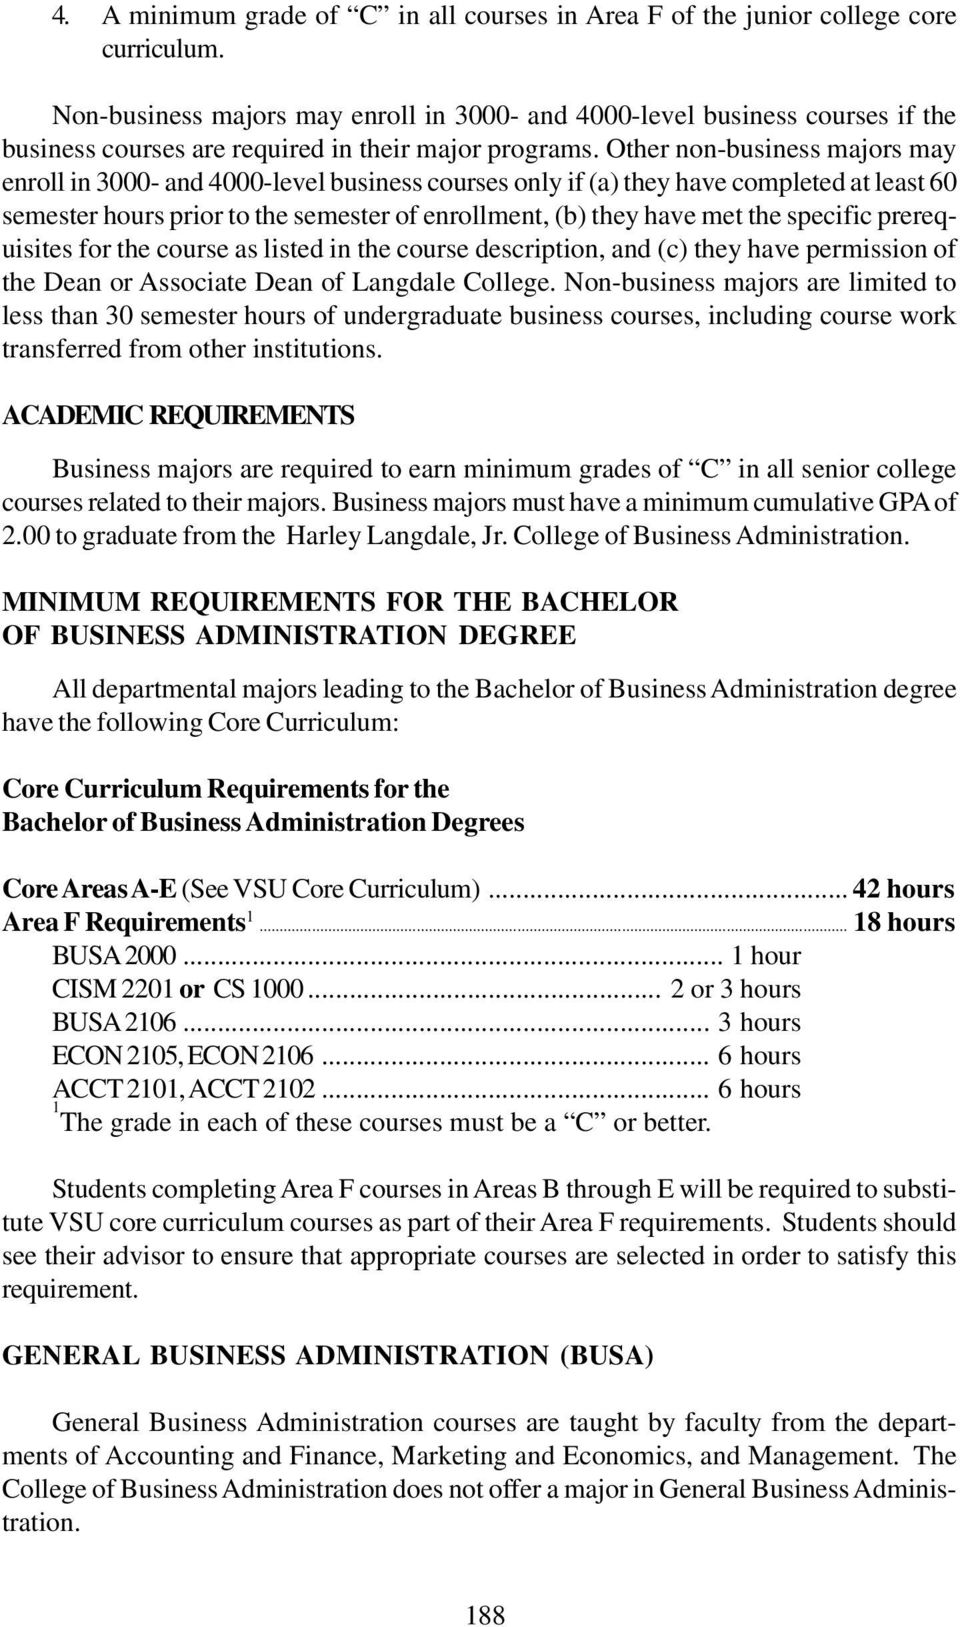 Other non-business majors may enroll in 3000- and 4000-level business courses only if (a) they have completed at least 60 semester hours prior to the semester of enrollment, (b) they have met the